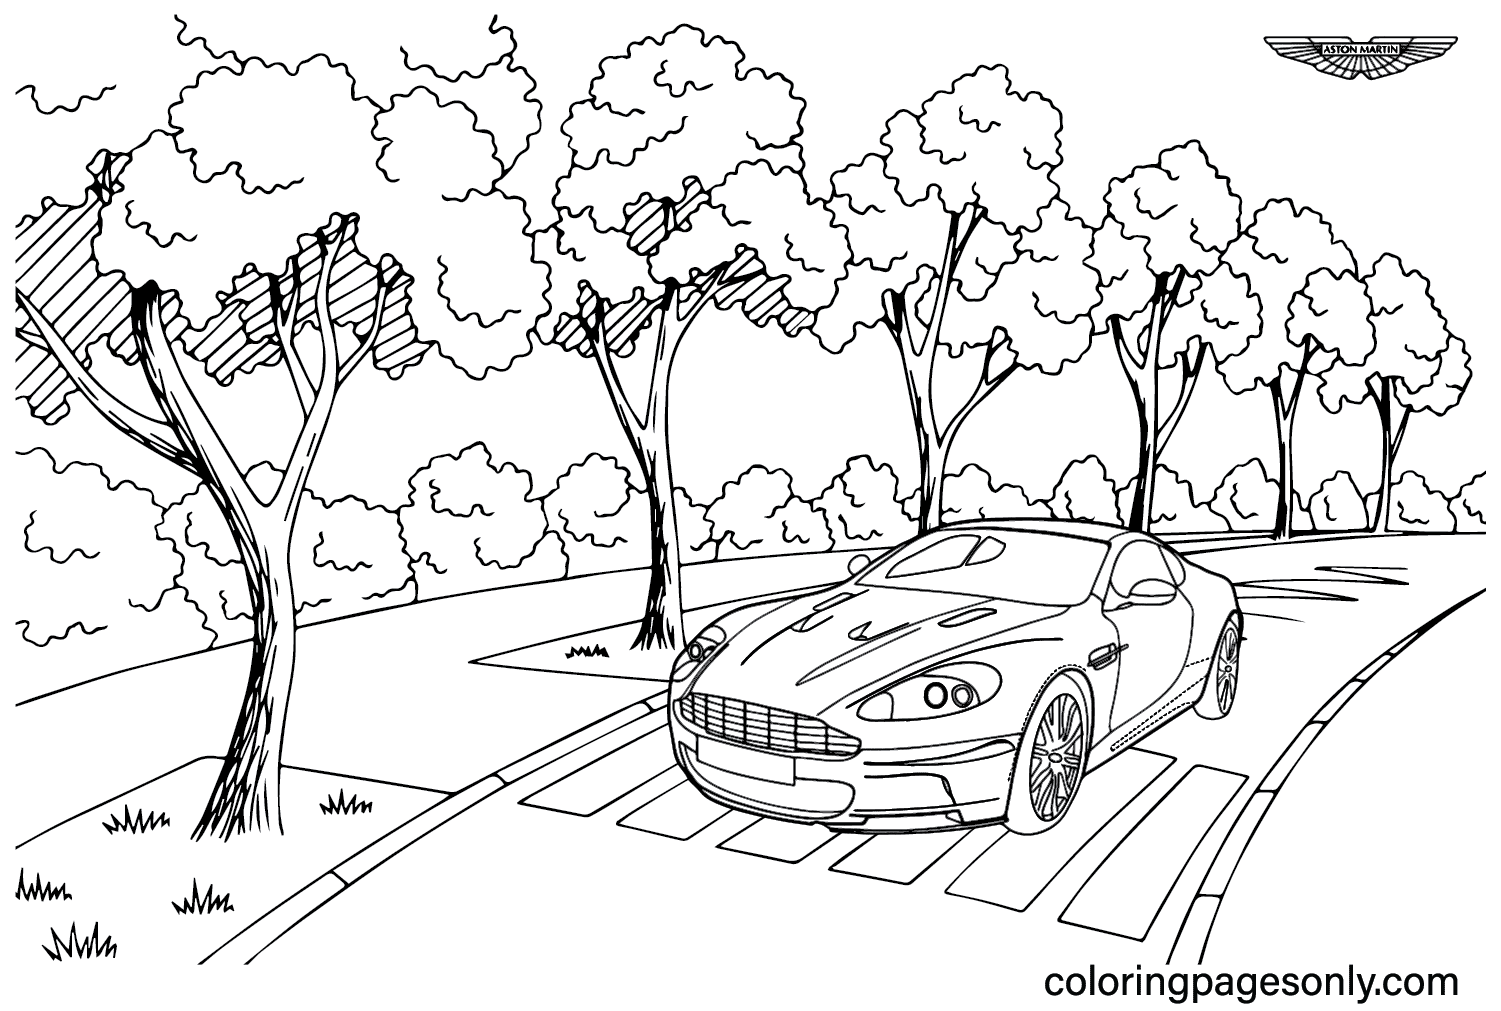 Aston Martin DBS V12 Coloring Page from Aston Martin